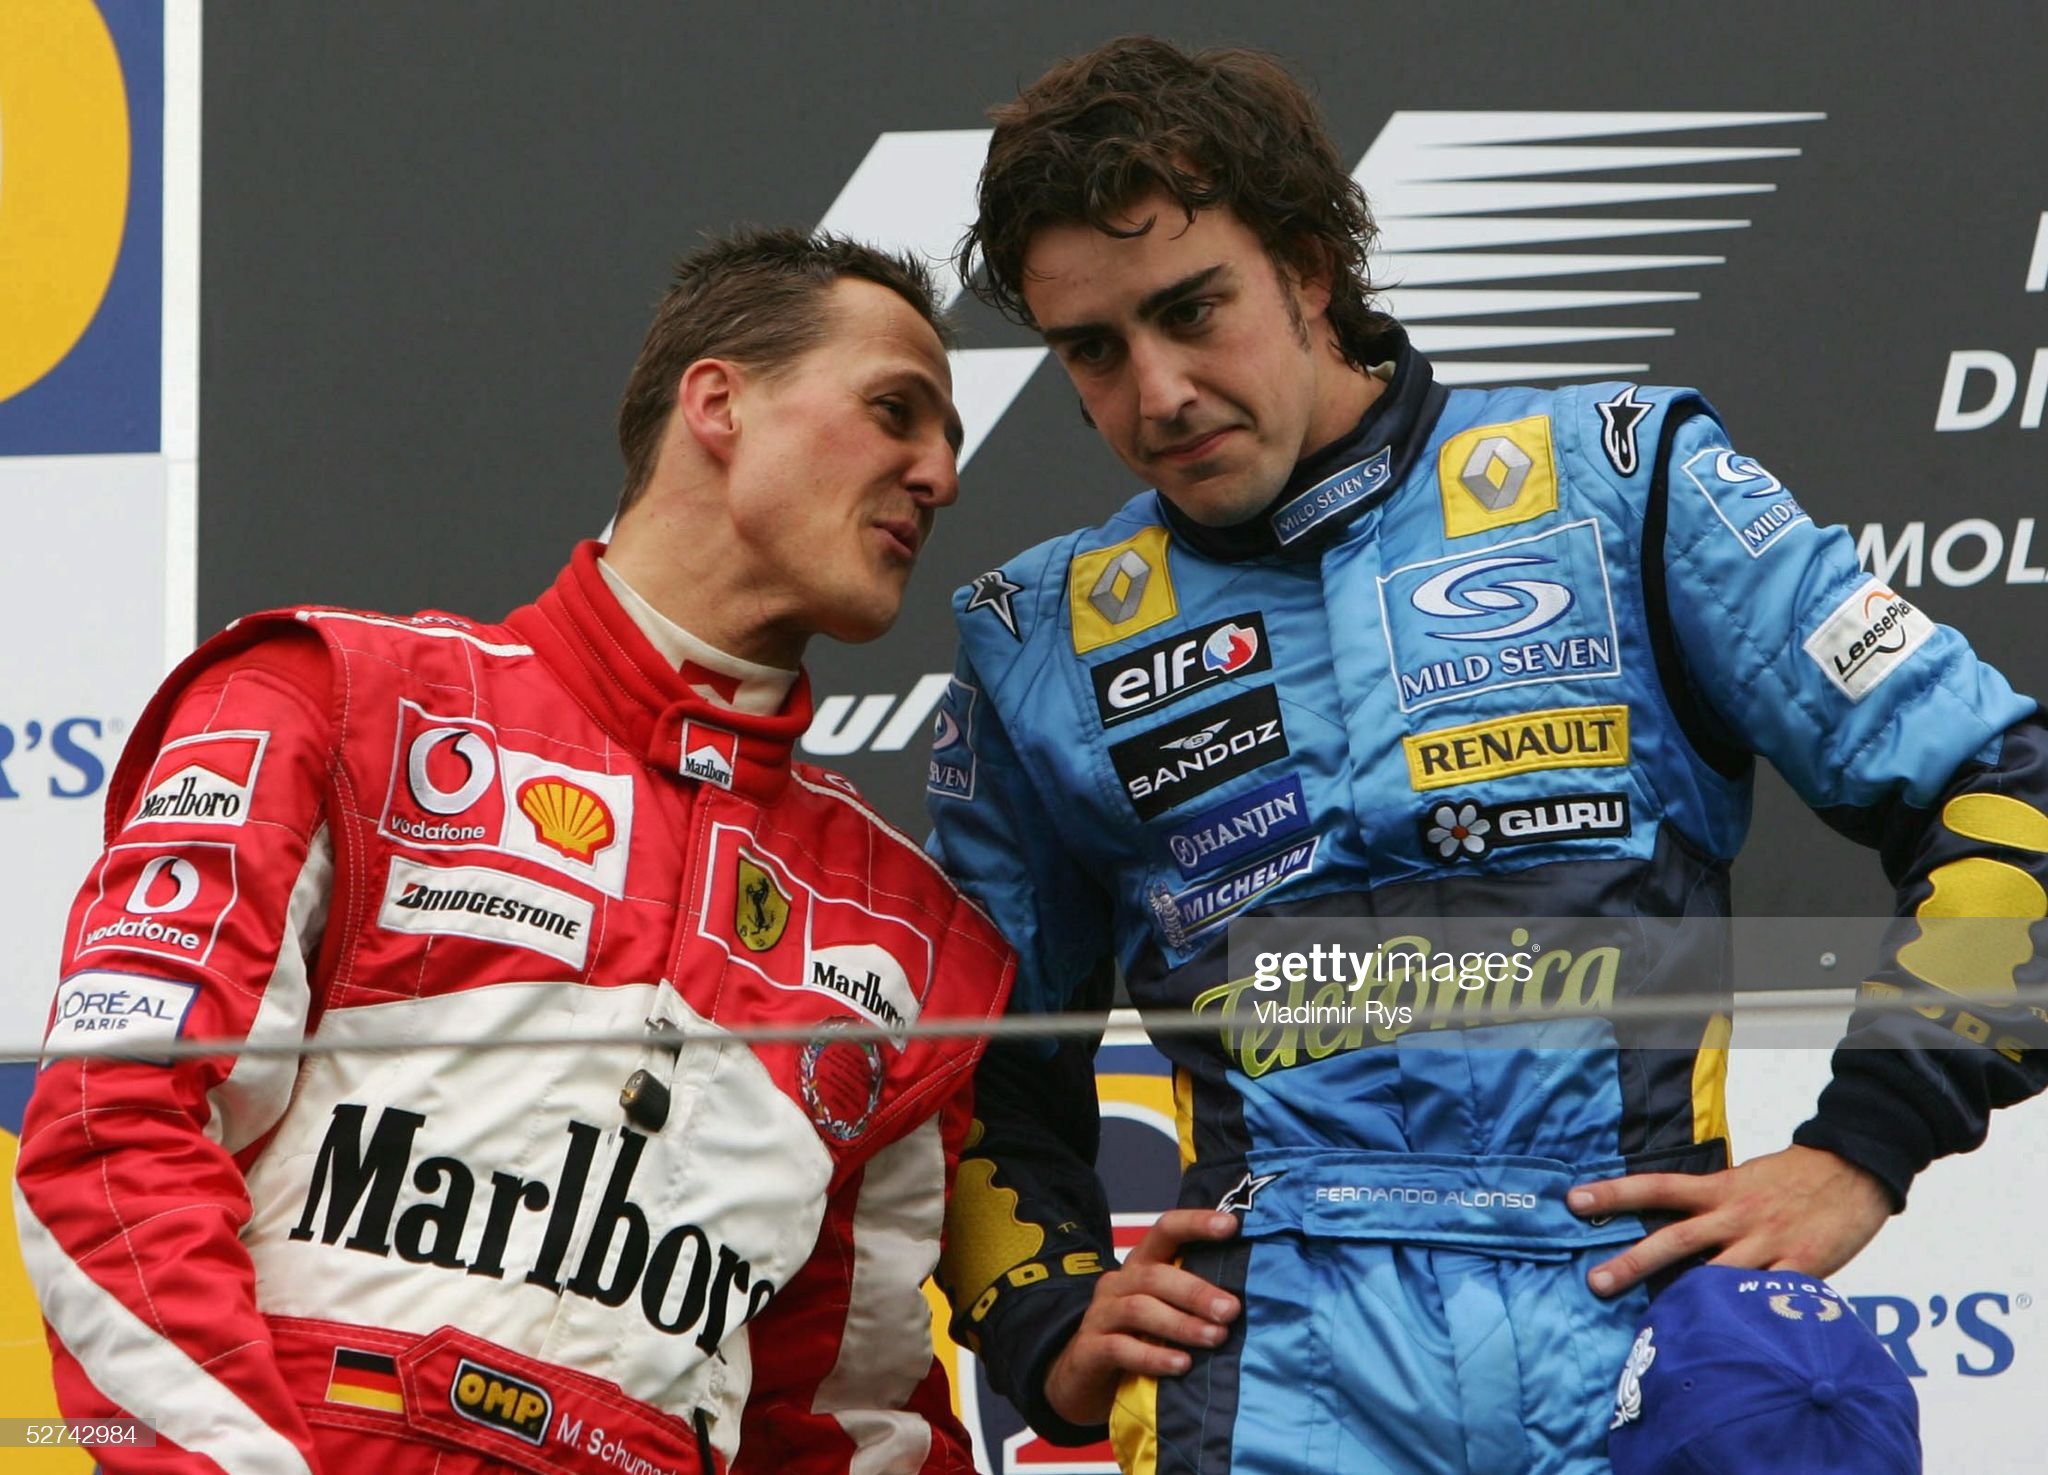 Fernando Alonso of Spain and Renault and Michael Schumacher of Ferrari and Germany speak on the podium after Alonso's victory in the San Marino F1 Grand Prix on April 24, 2005 in Imola, Italy.